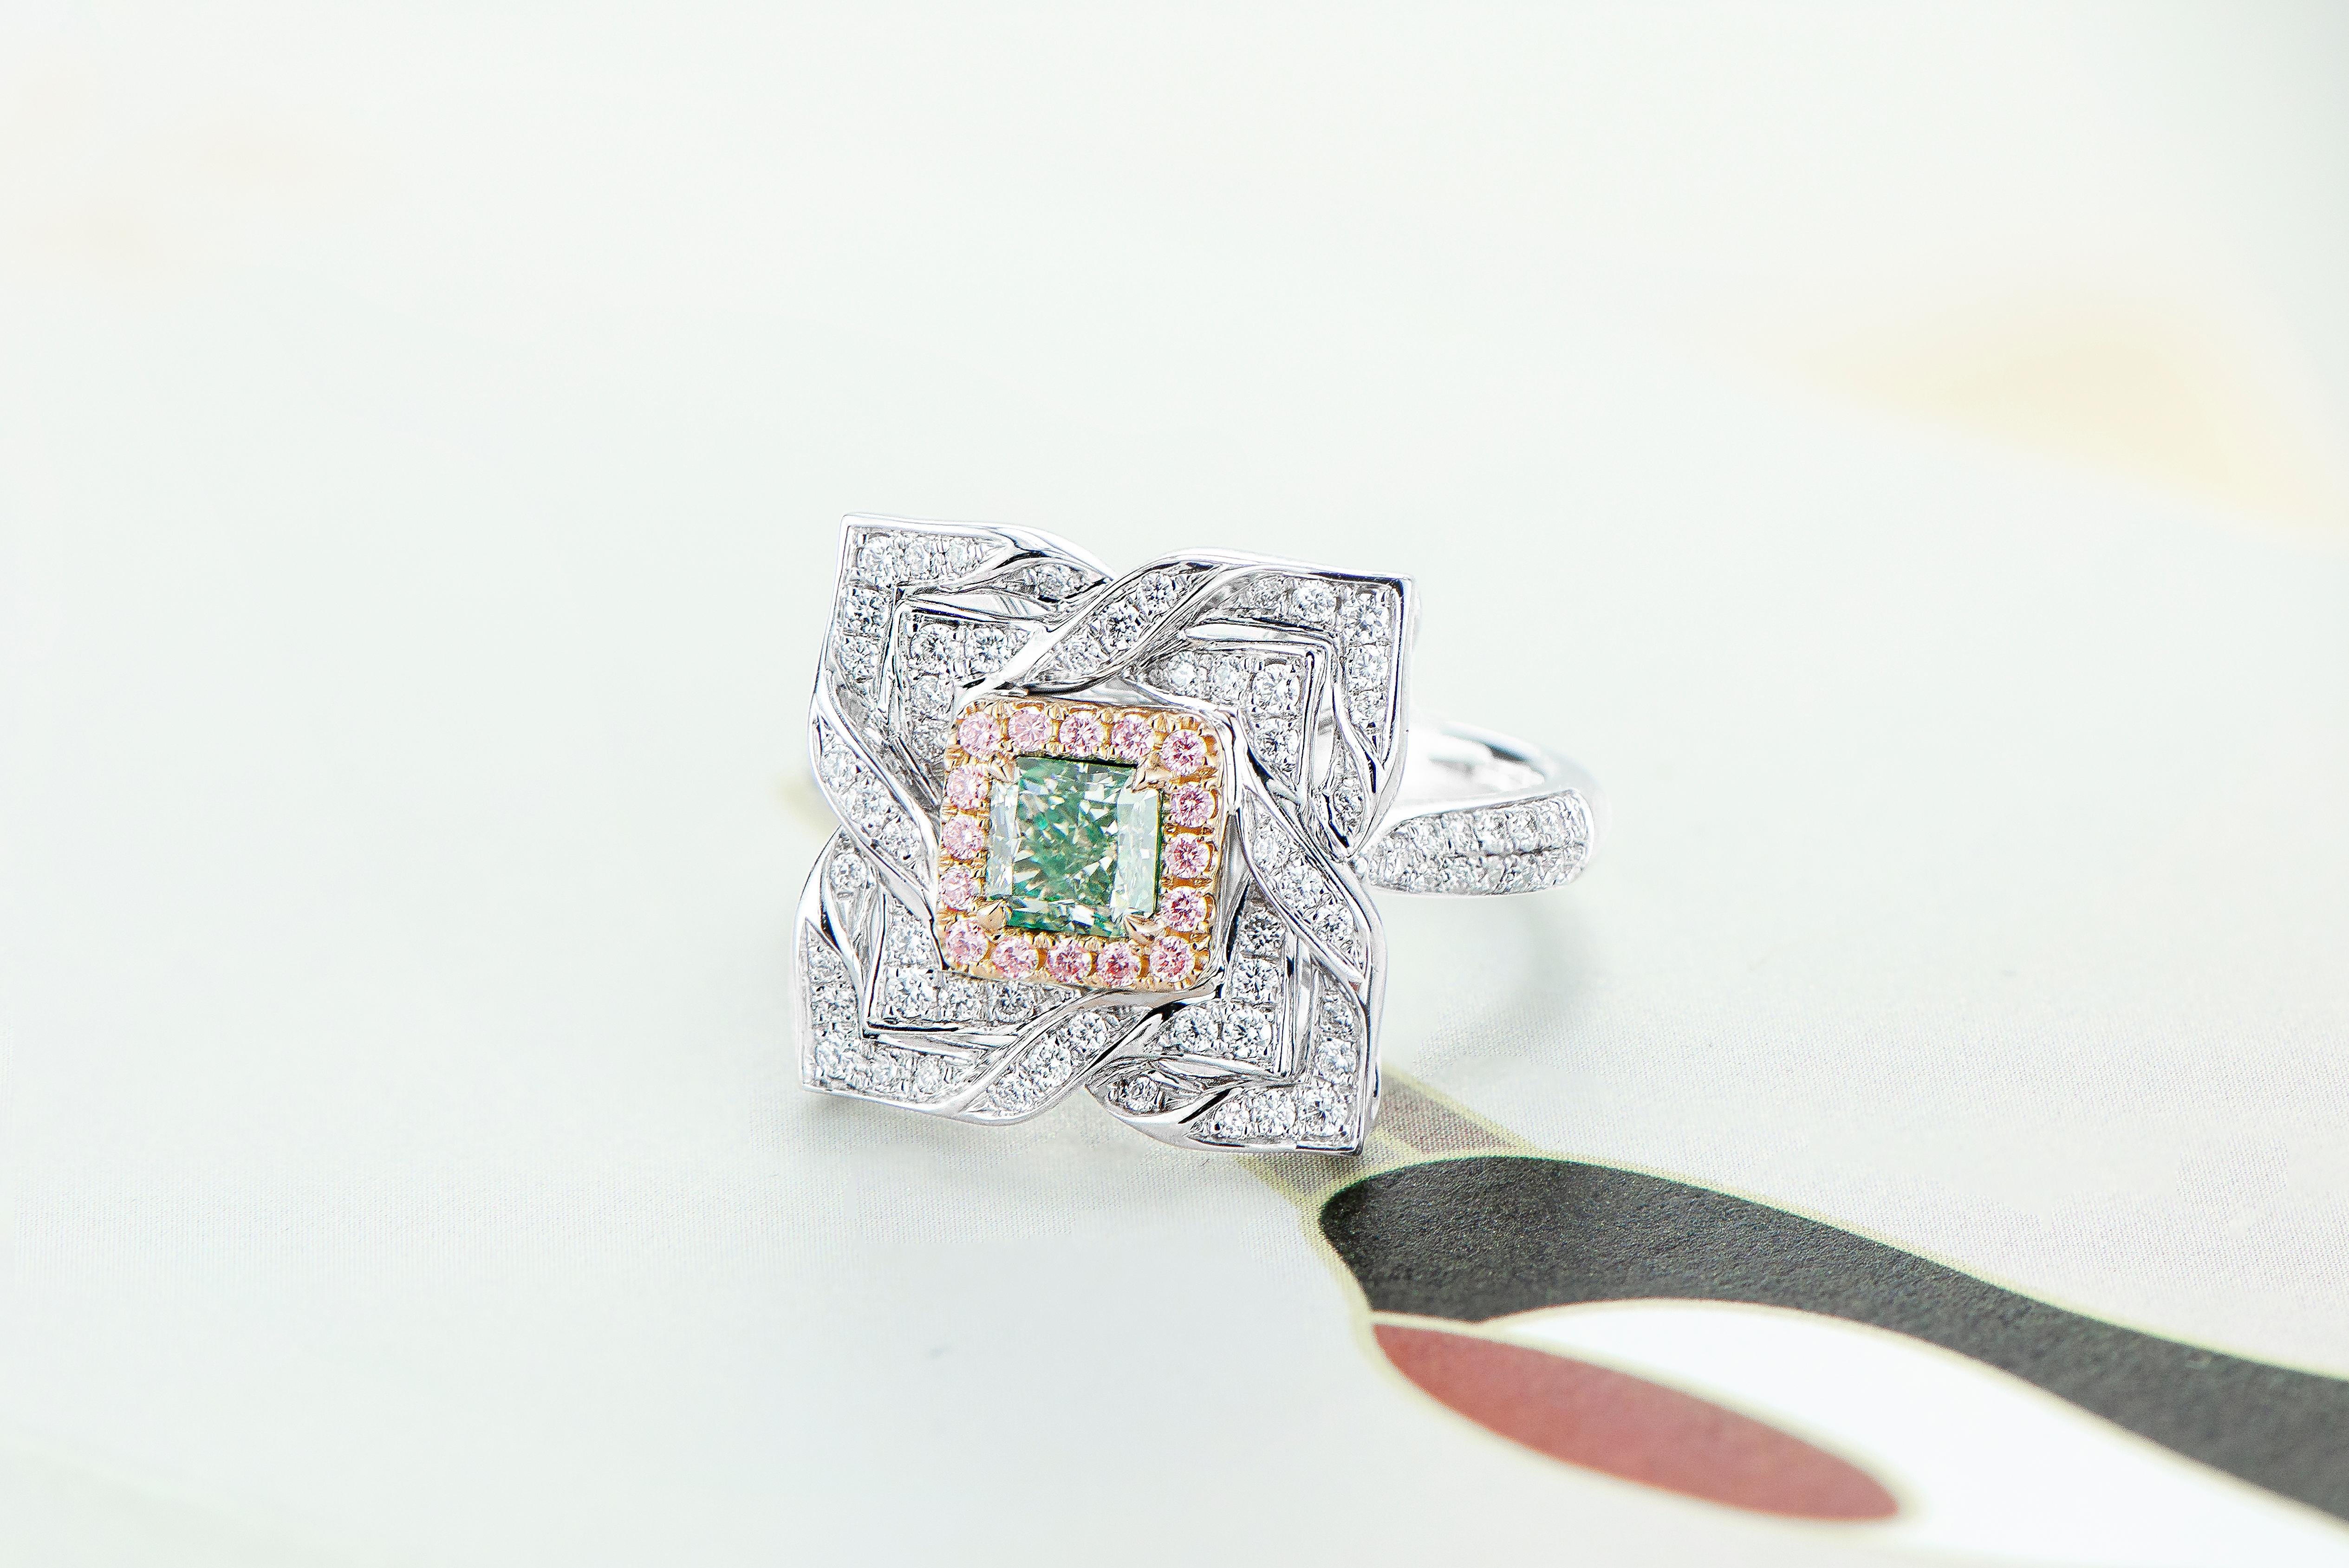  0.69ct Fancy Light Green Cushion Shape Natural Diamond, a true masterpiece of nature's beauty, elegantly set in 18kt gold. This captivating piece of jewelry is destined to be the centerpiece of your collection.

The lush green hue of the Fancy